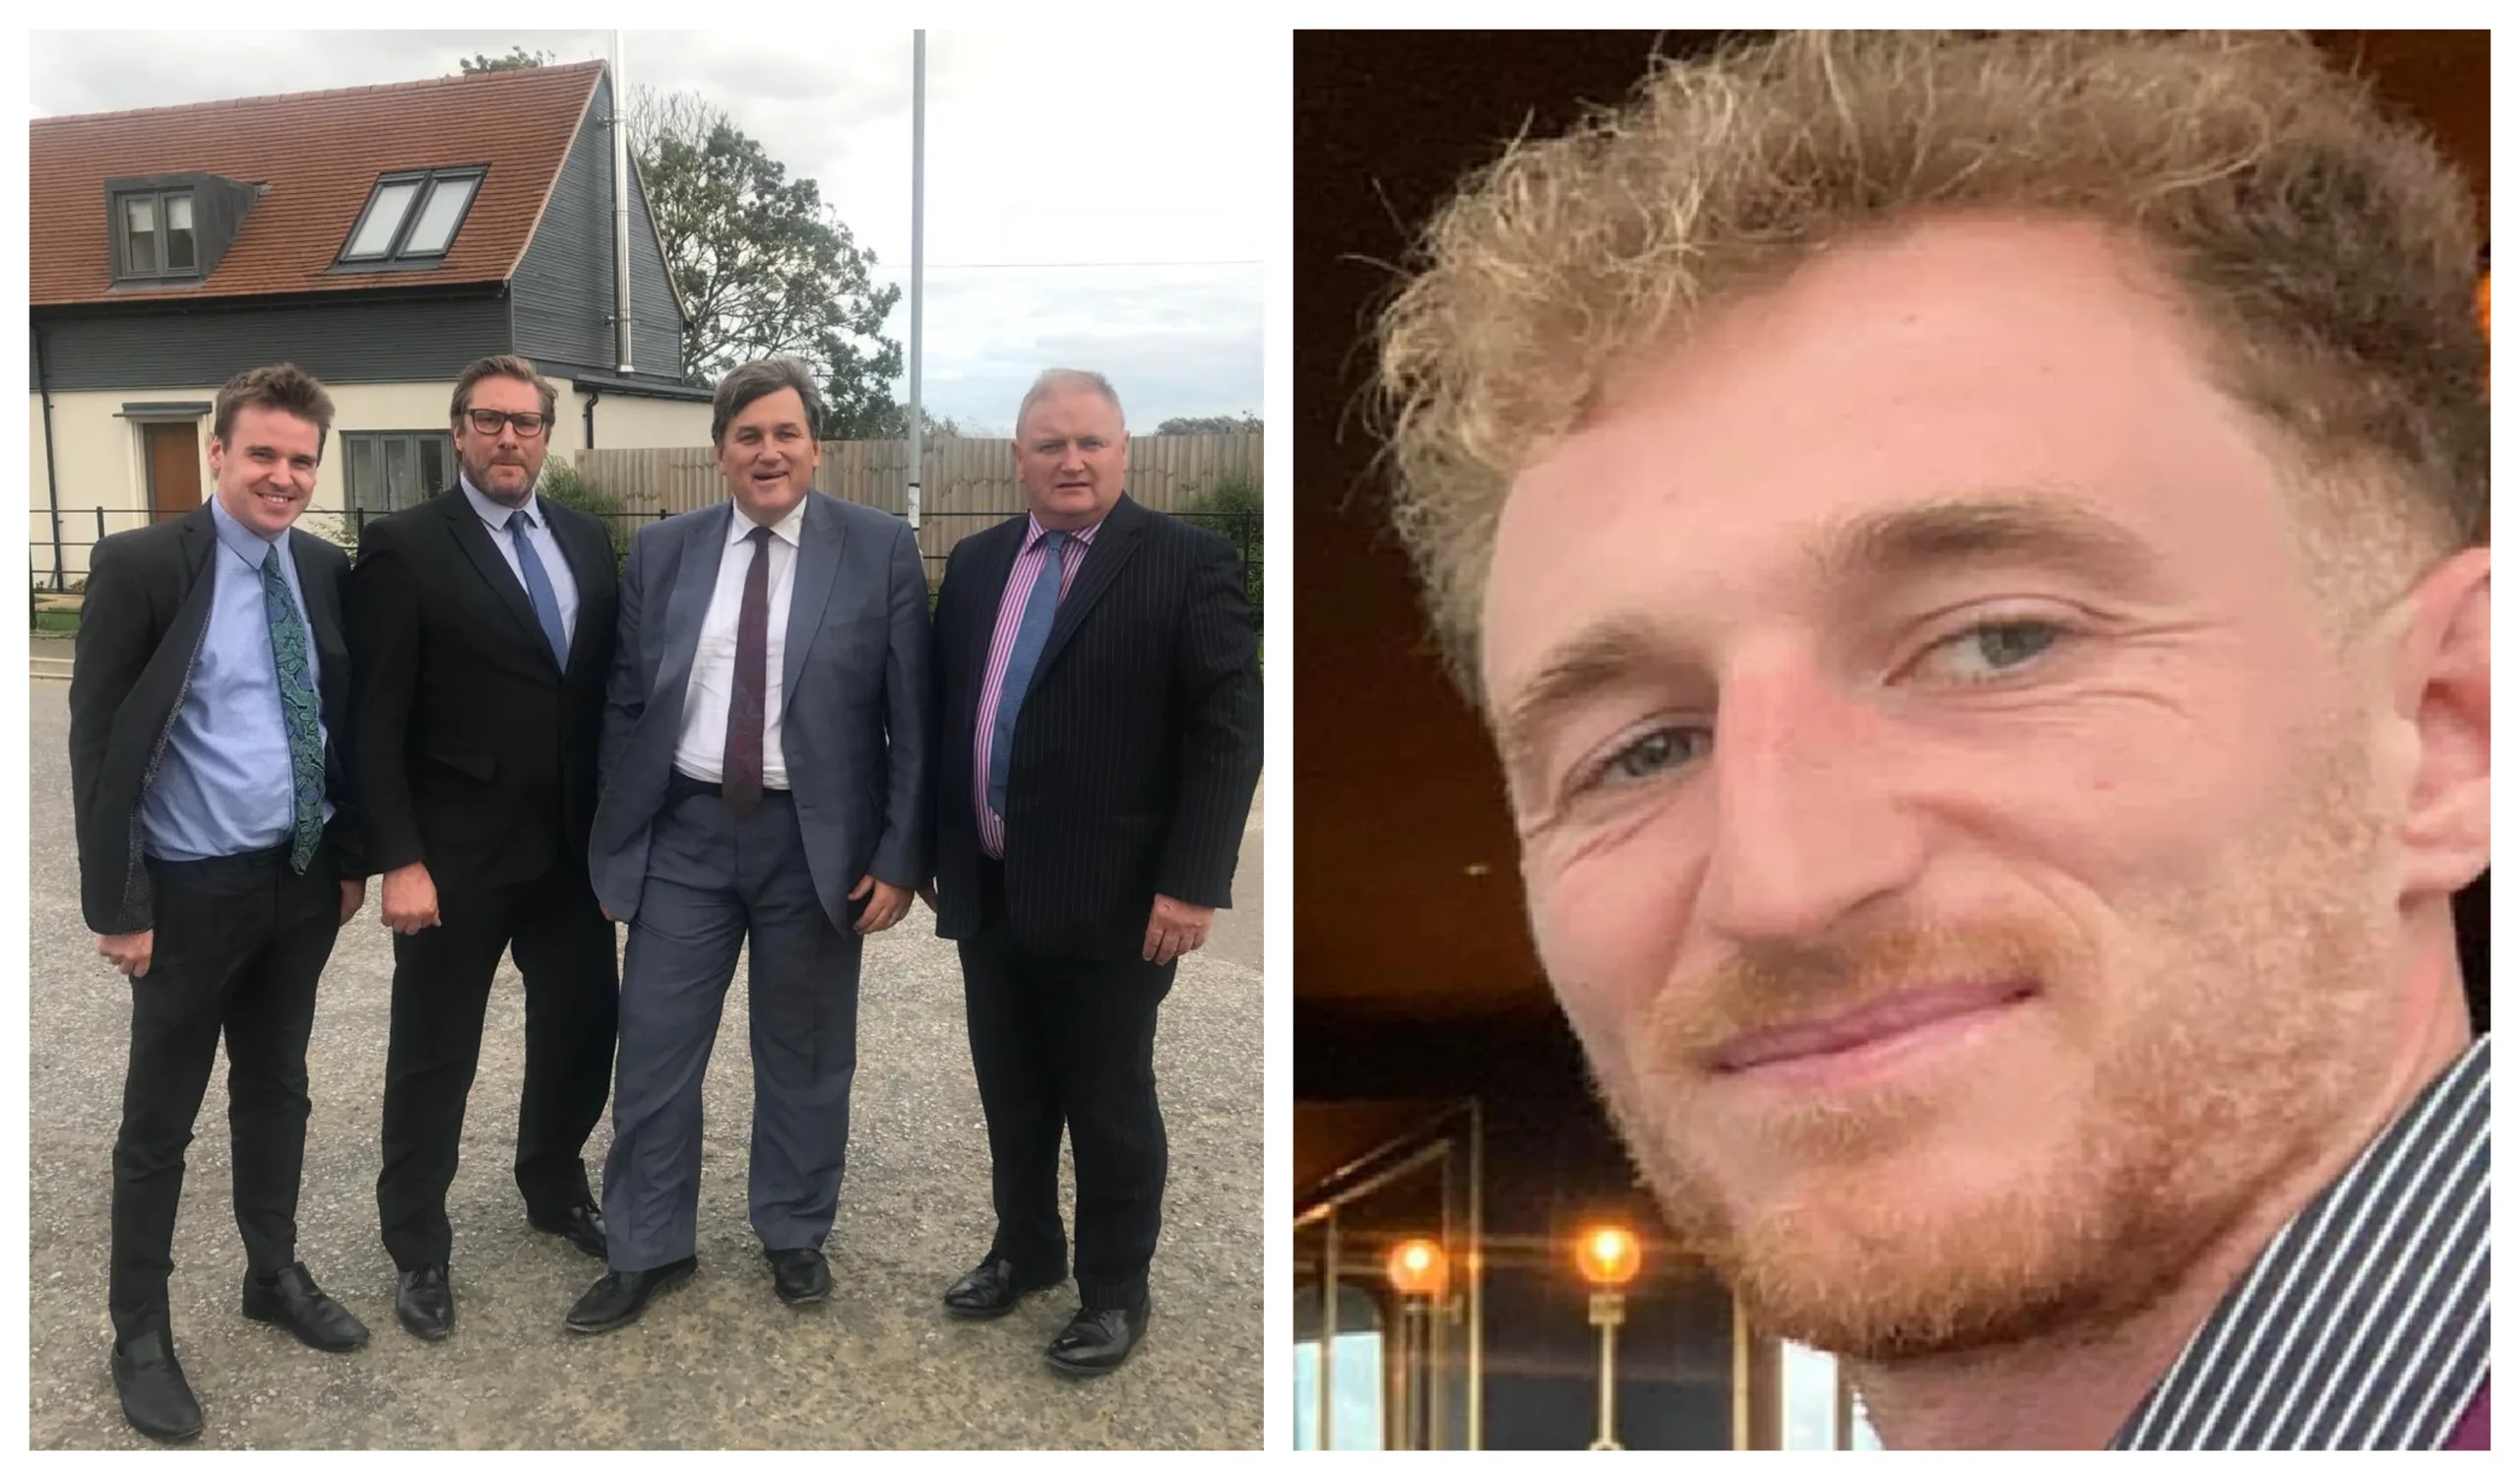 Cllr Charles Roberts in 2018 showing the then Housing Minister Kit Malthouse around Stretham CLT. With him is then Combined Authority Mayor James Palmer and the mayor’s chief of staff Tom Hunt. Cllr Doug Stewart (right)